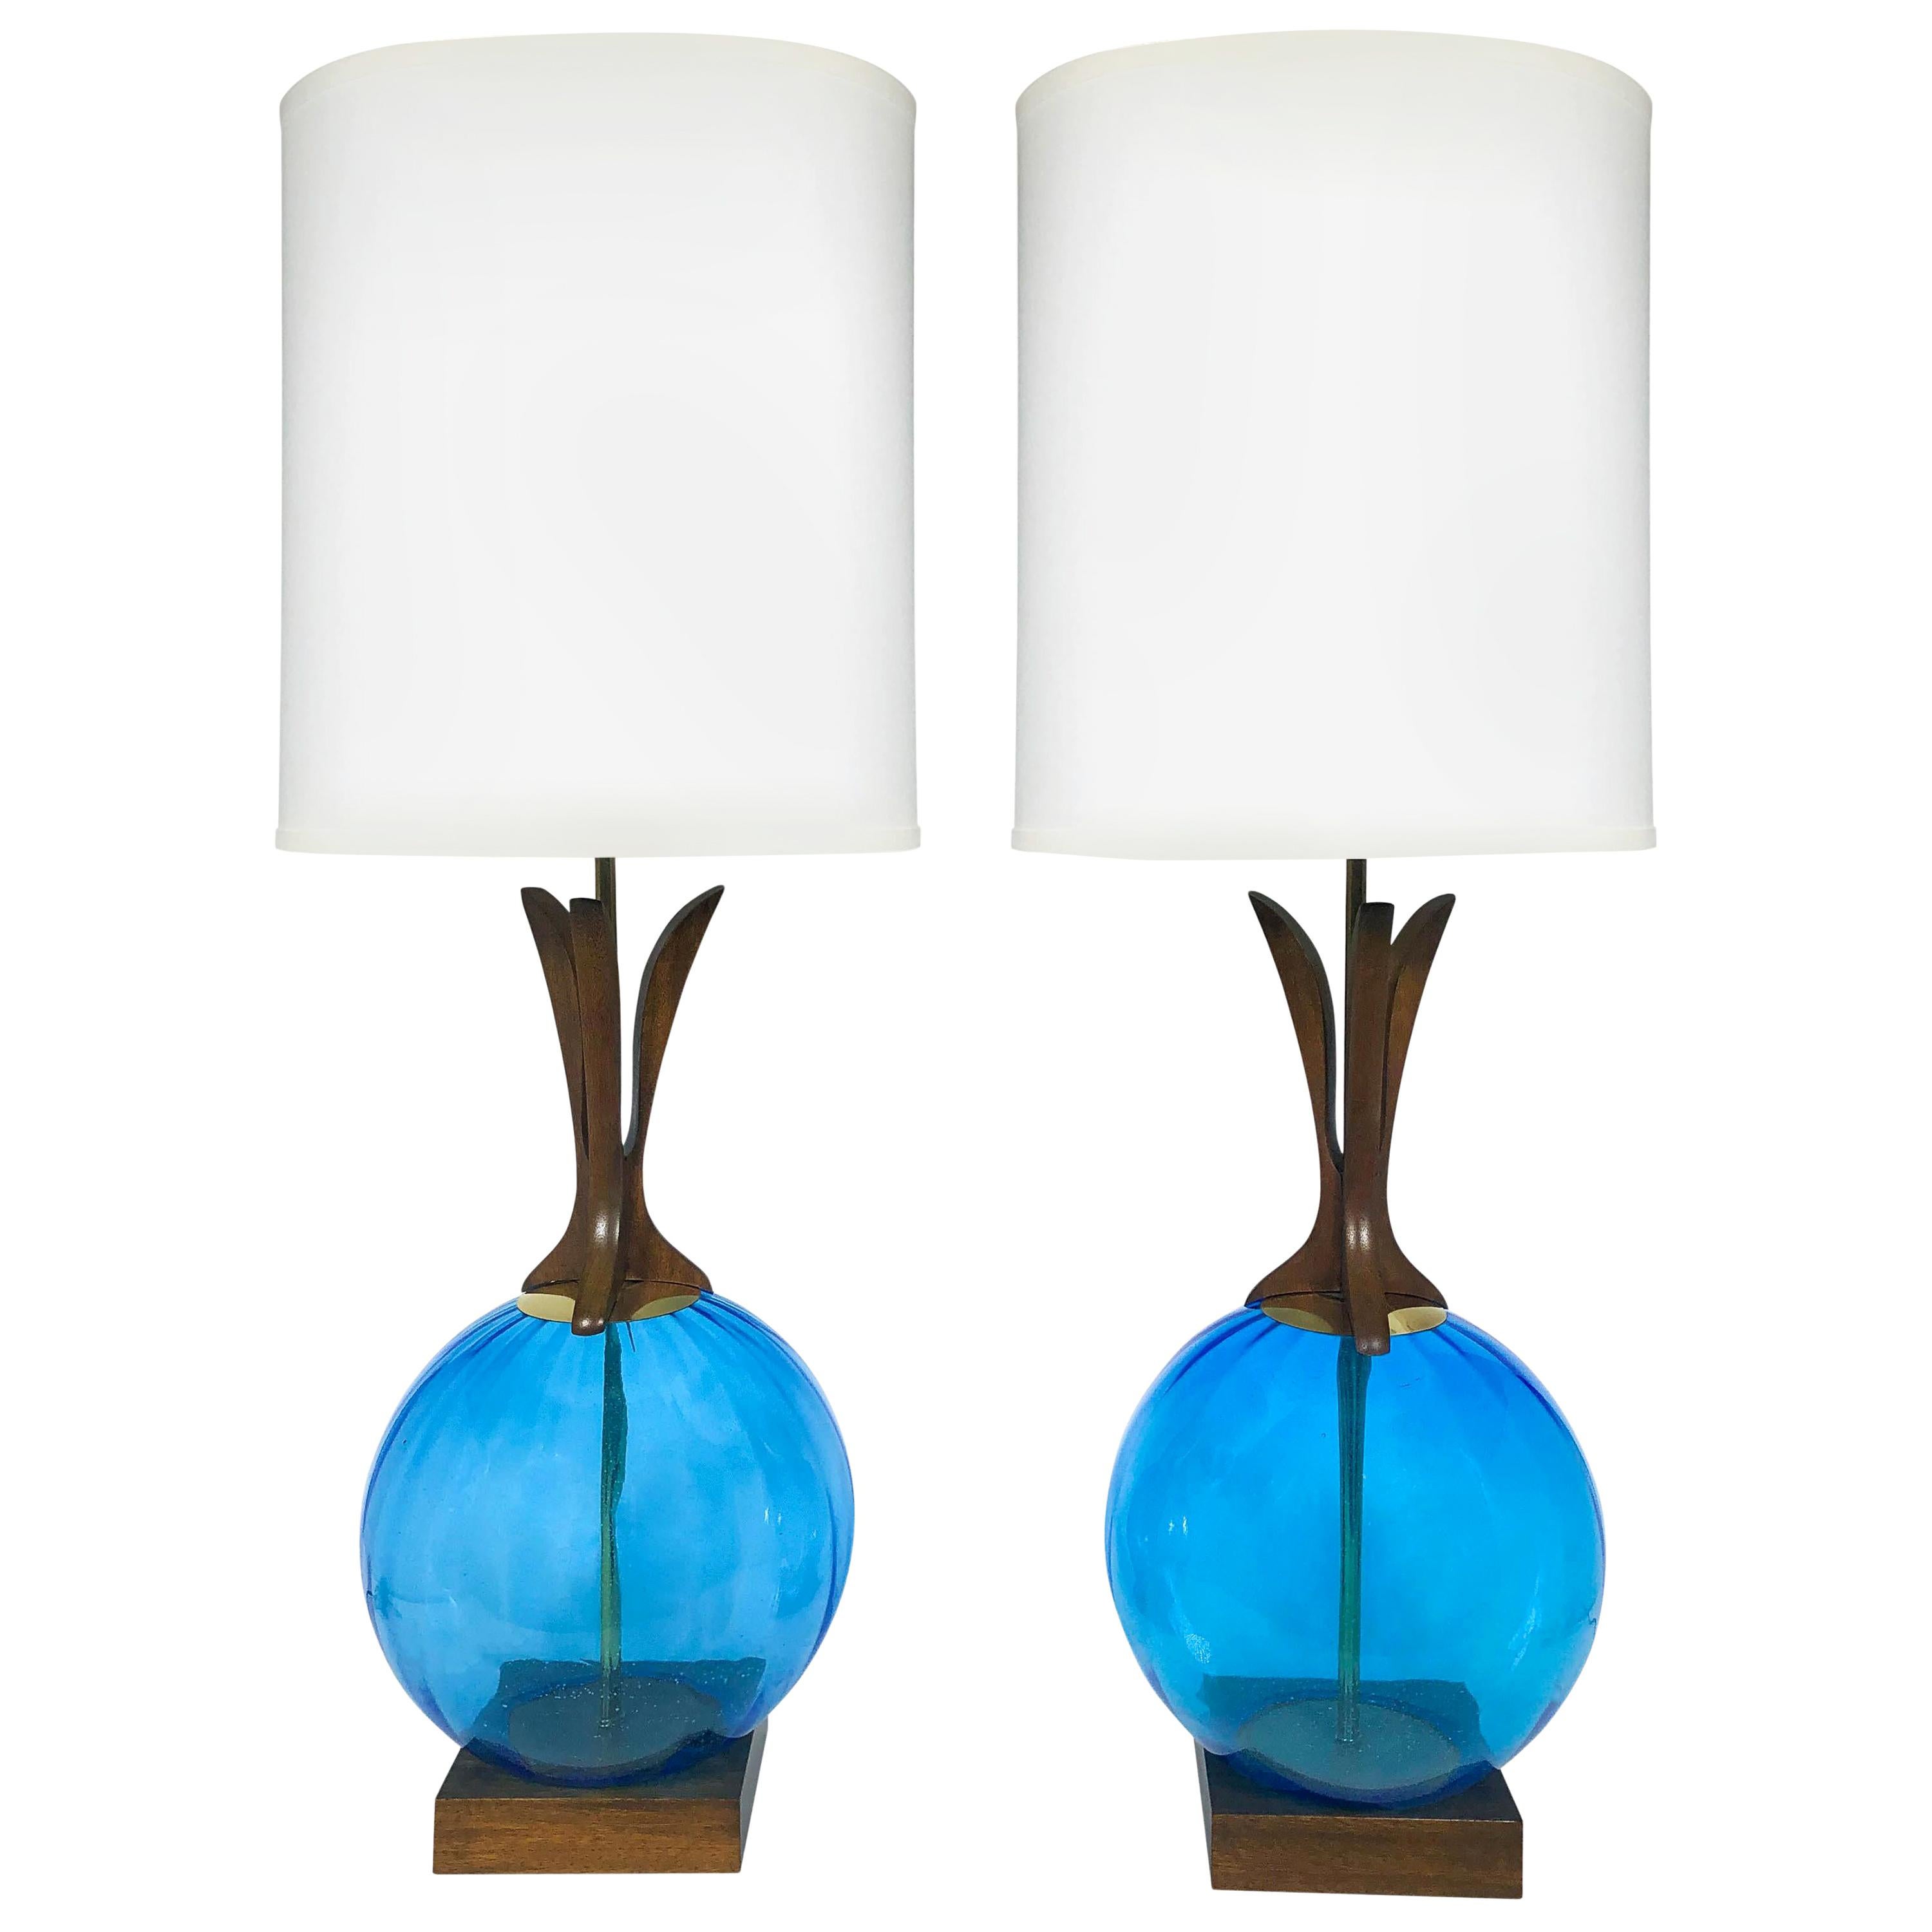 Danish Midcentury Walnut and Blue Glass Lamps, a Pair